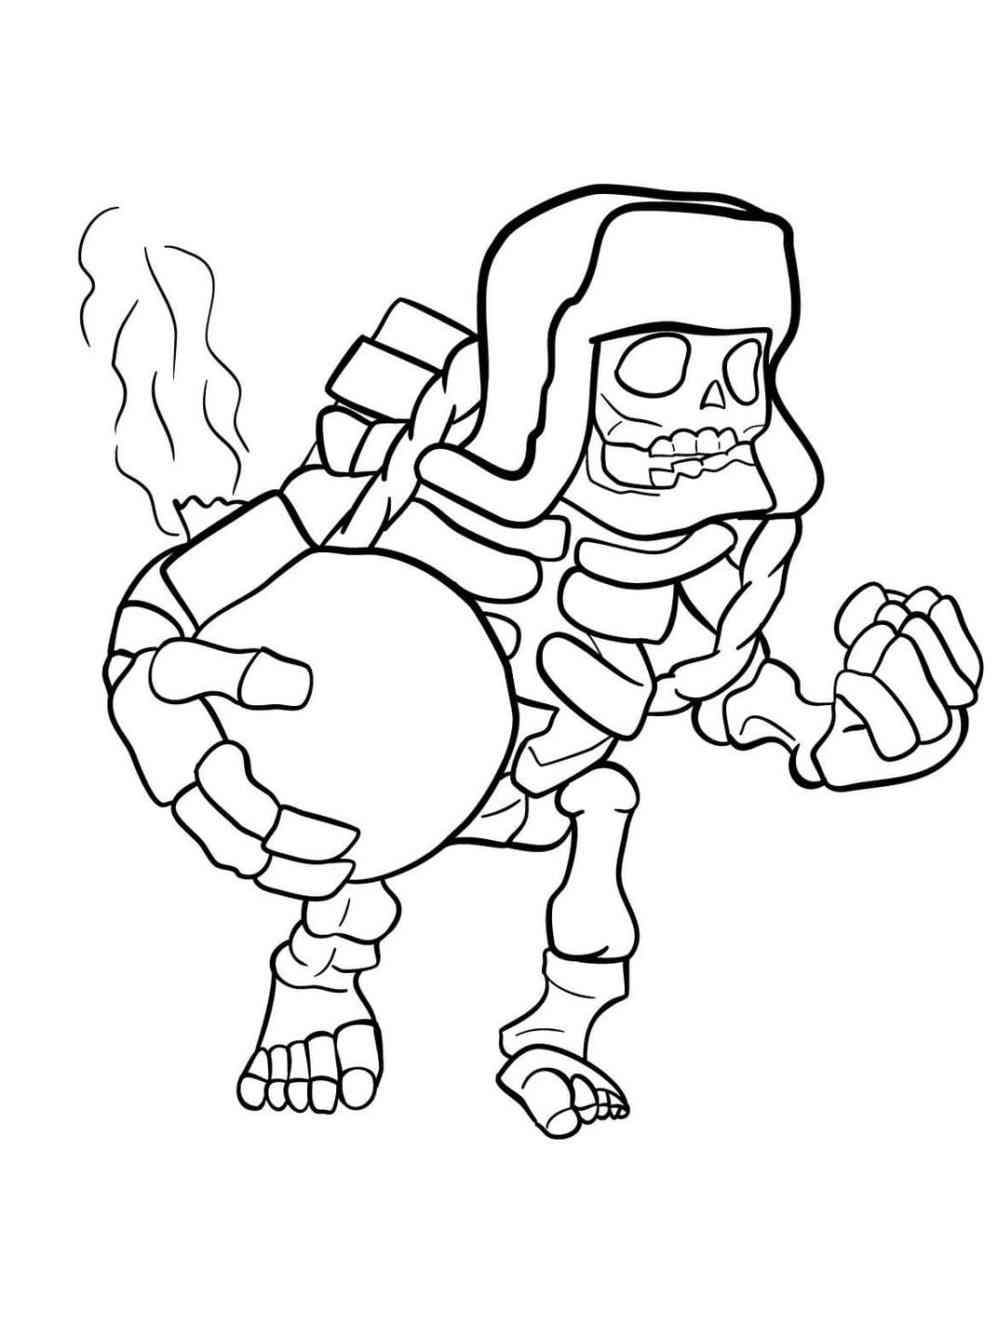 Free printable Clash Royale coloring pages.